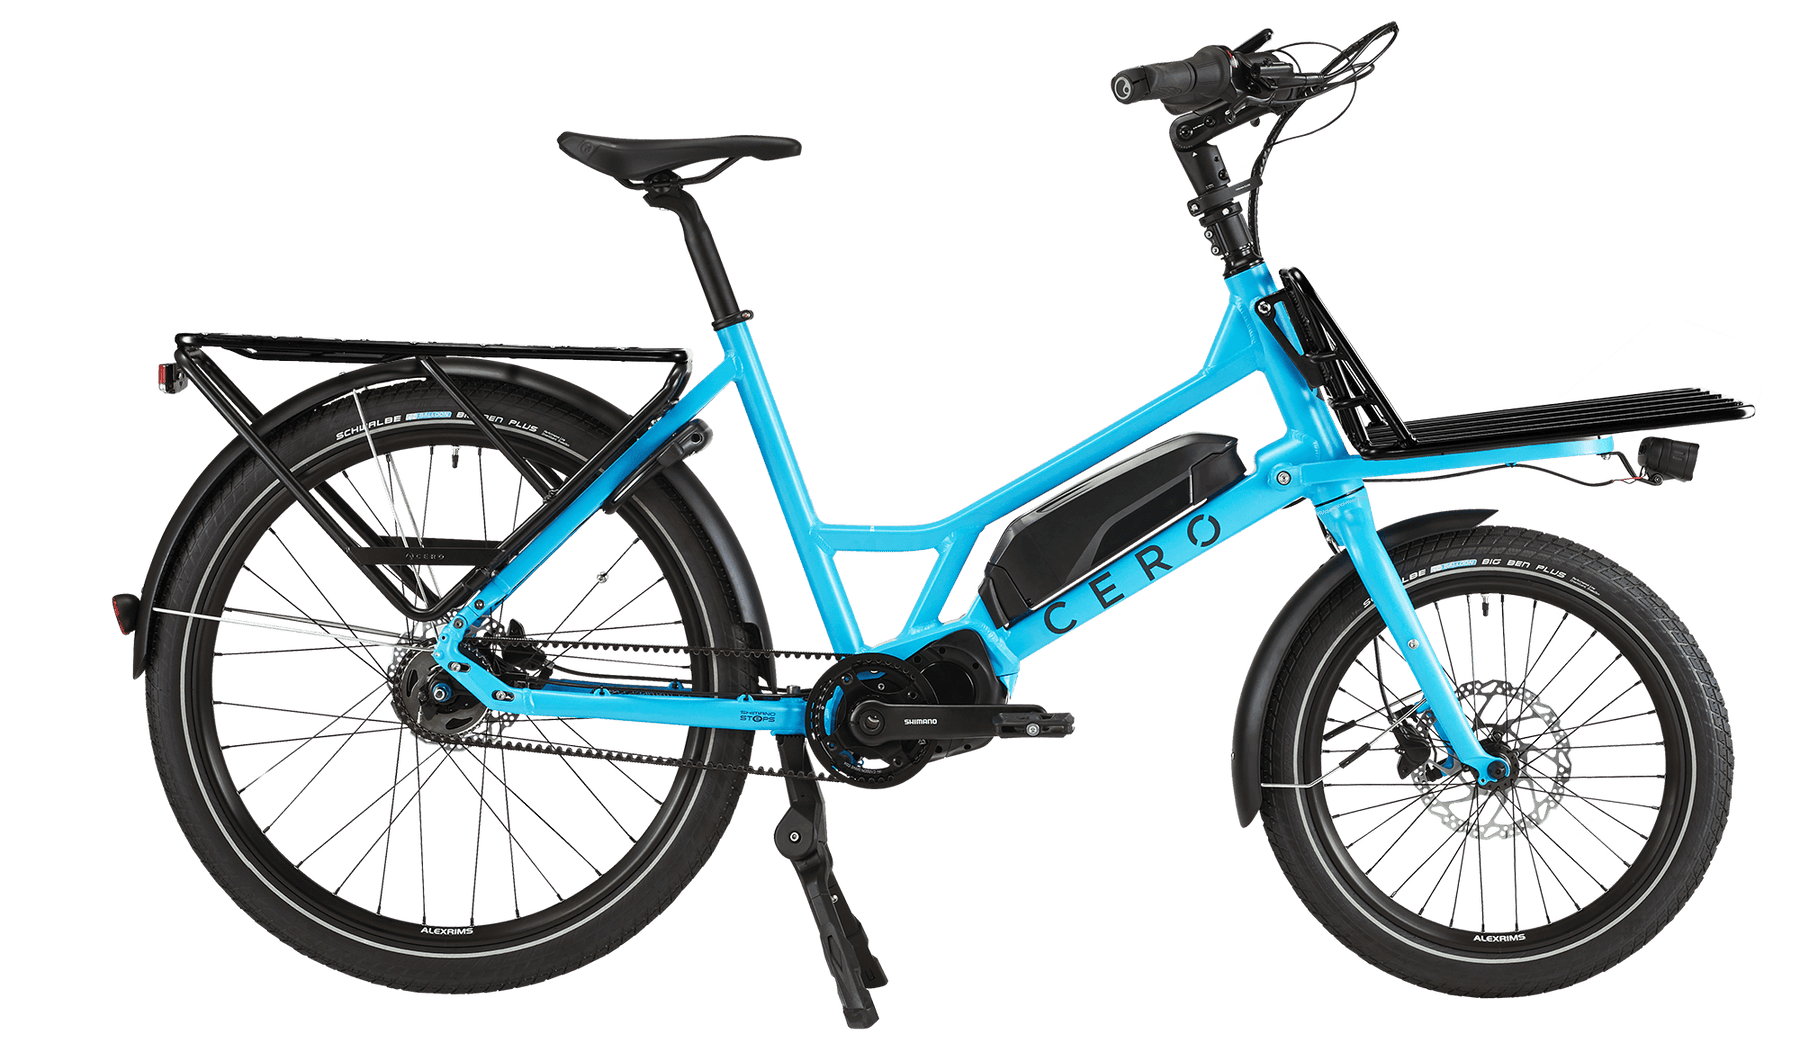 Blue CERO One with a rear rack and Platform on the front